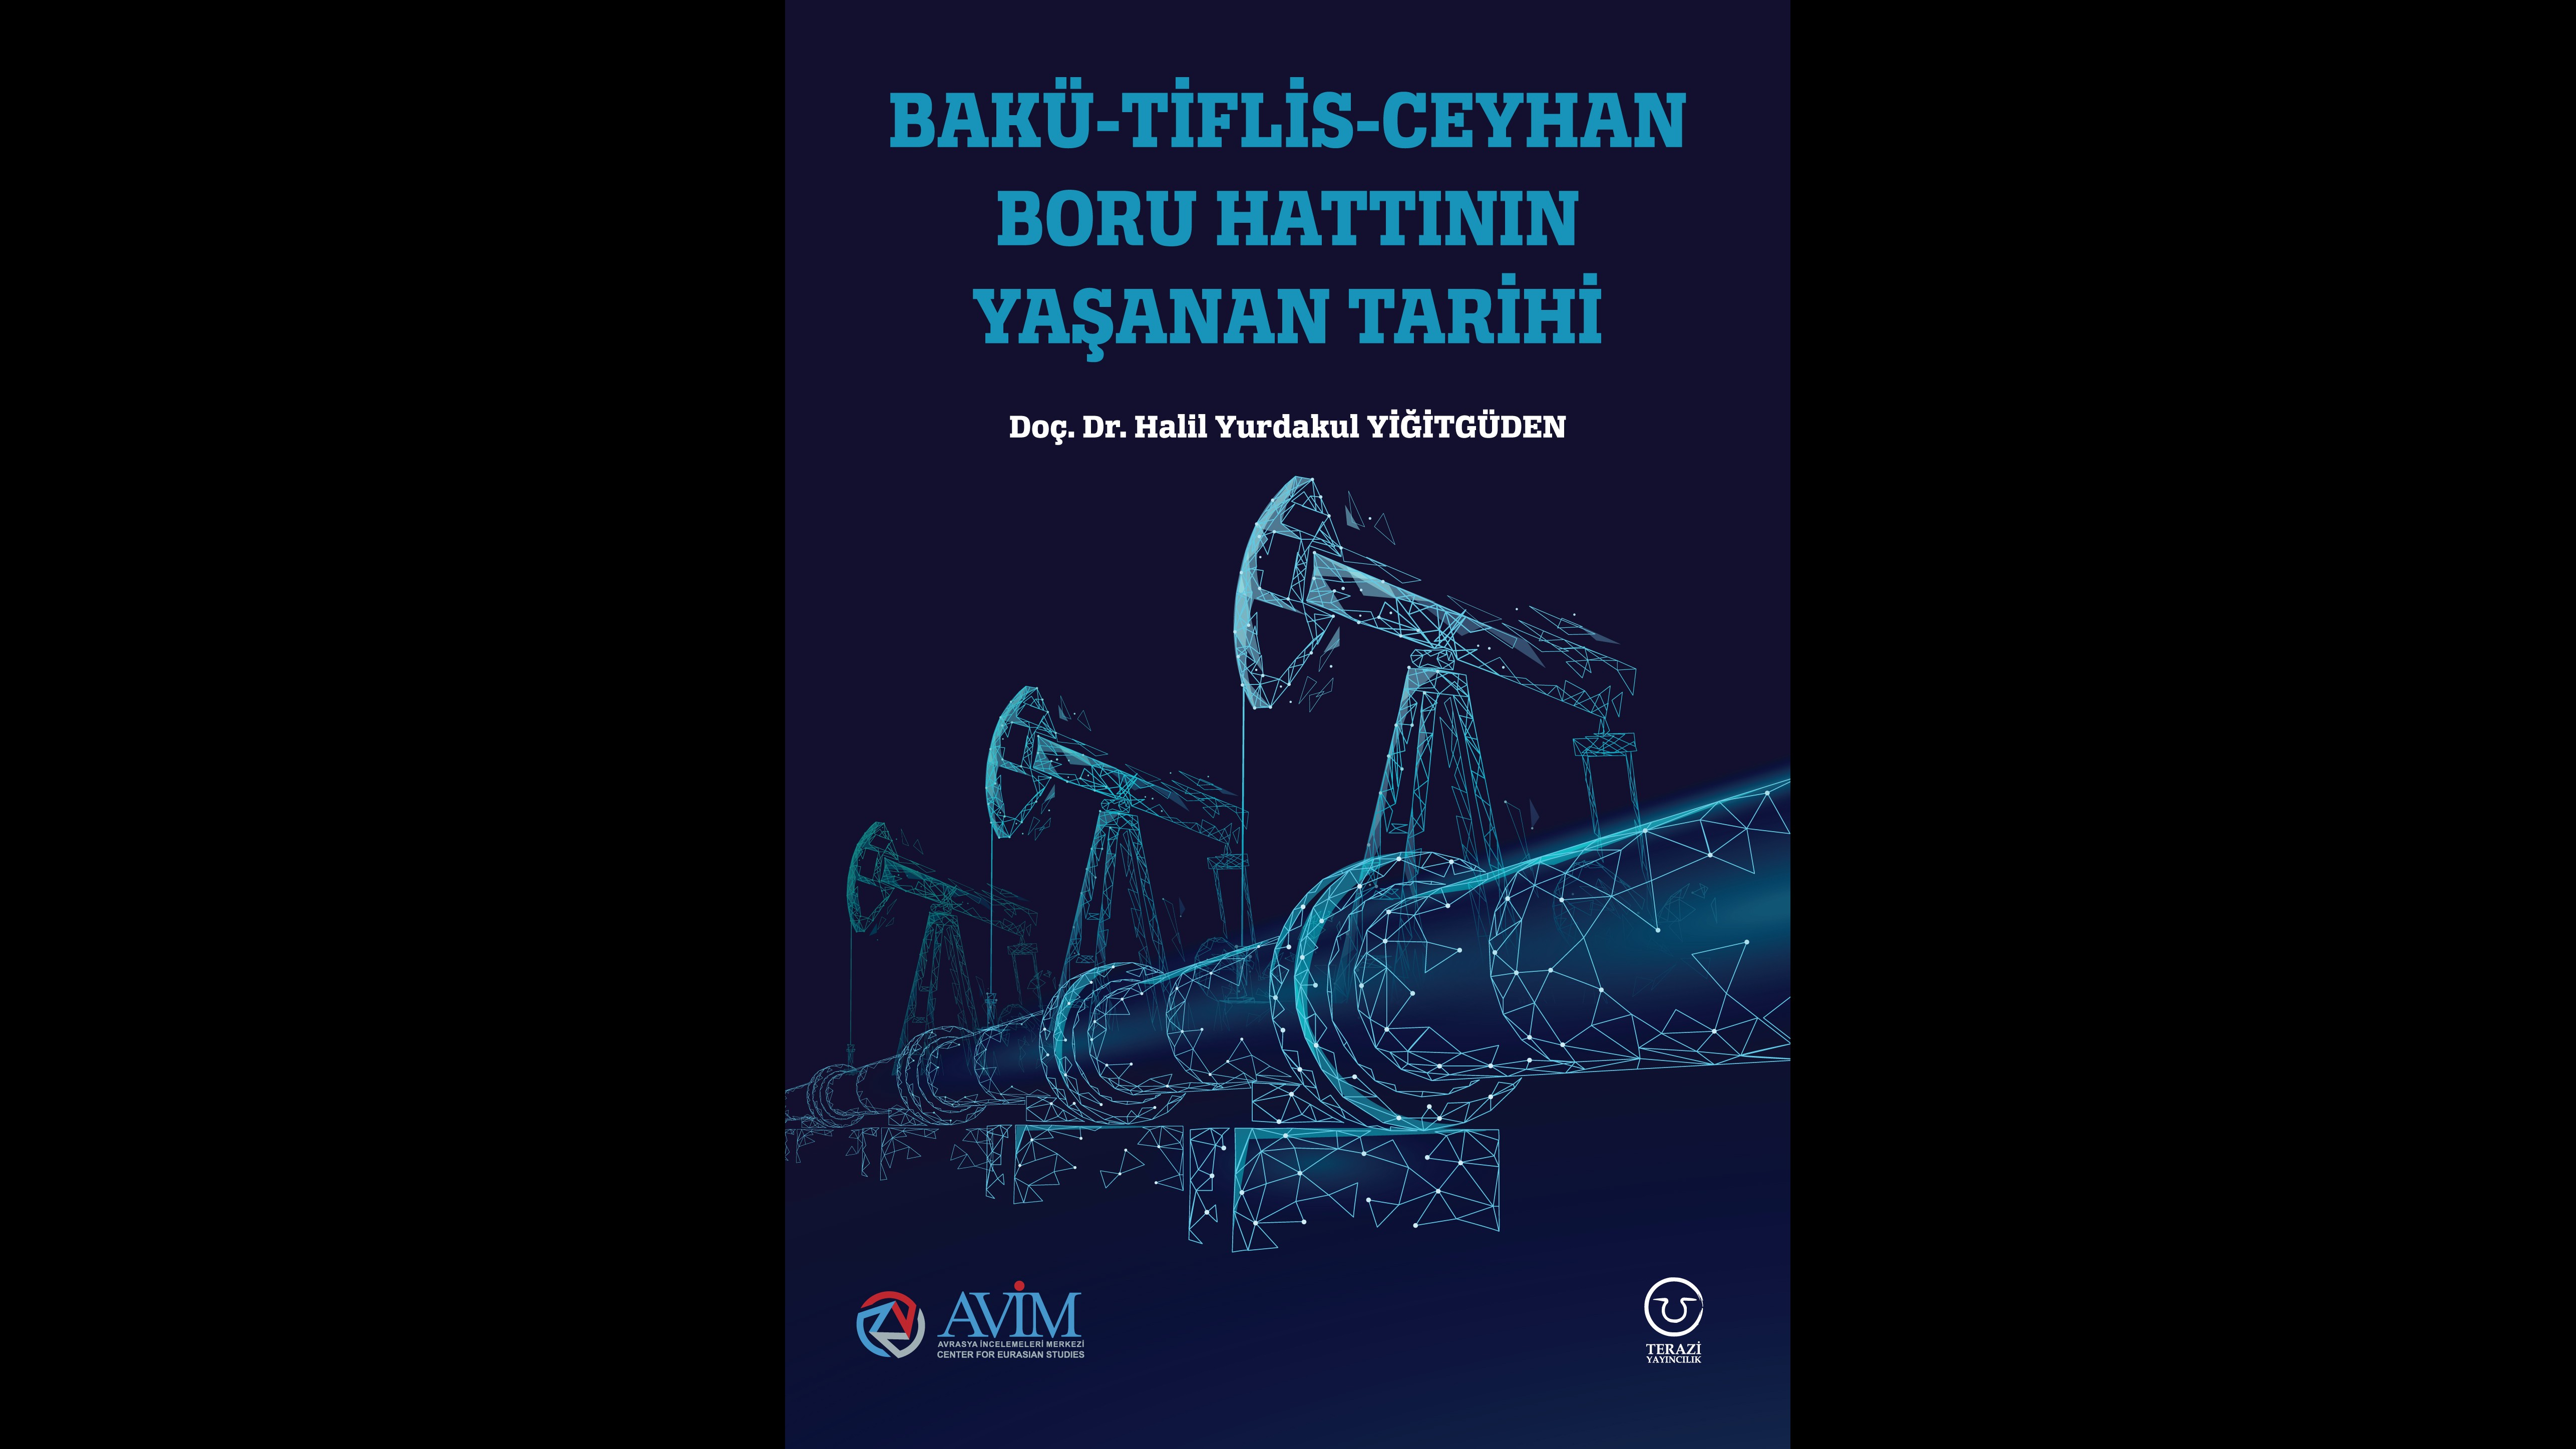 ANNONCEMENT: A NEW BOOK FROM AVİM: “THE WITNESSED HISTORY OF THE BAKU-TBILISI-CEYHAN PIPELINE”